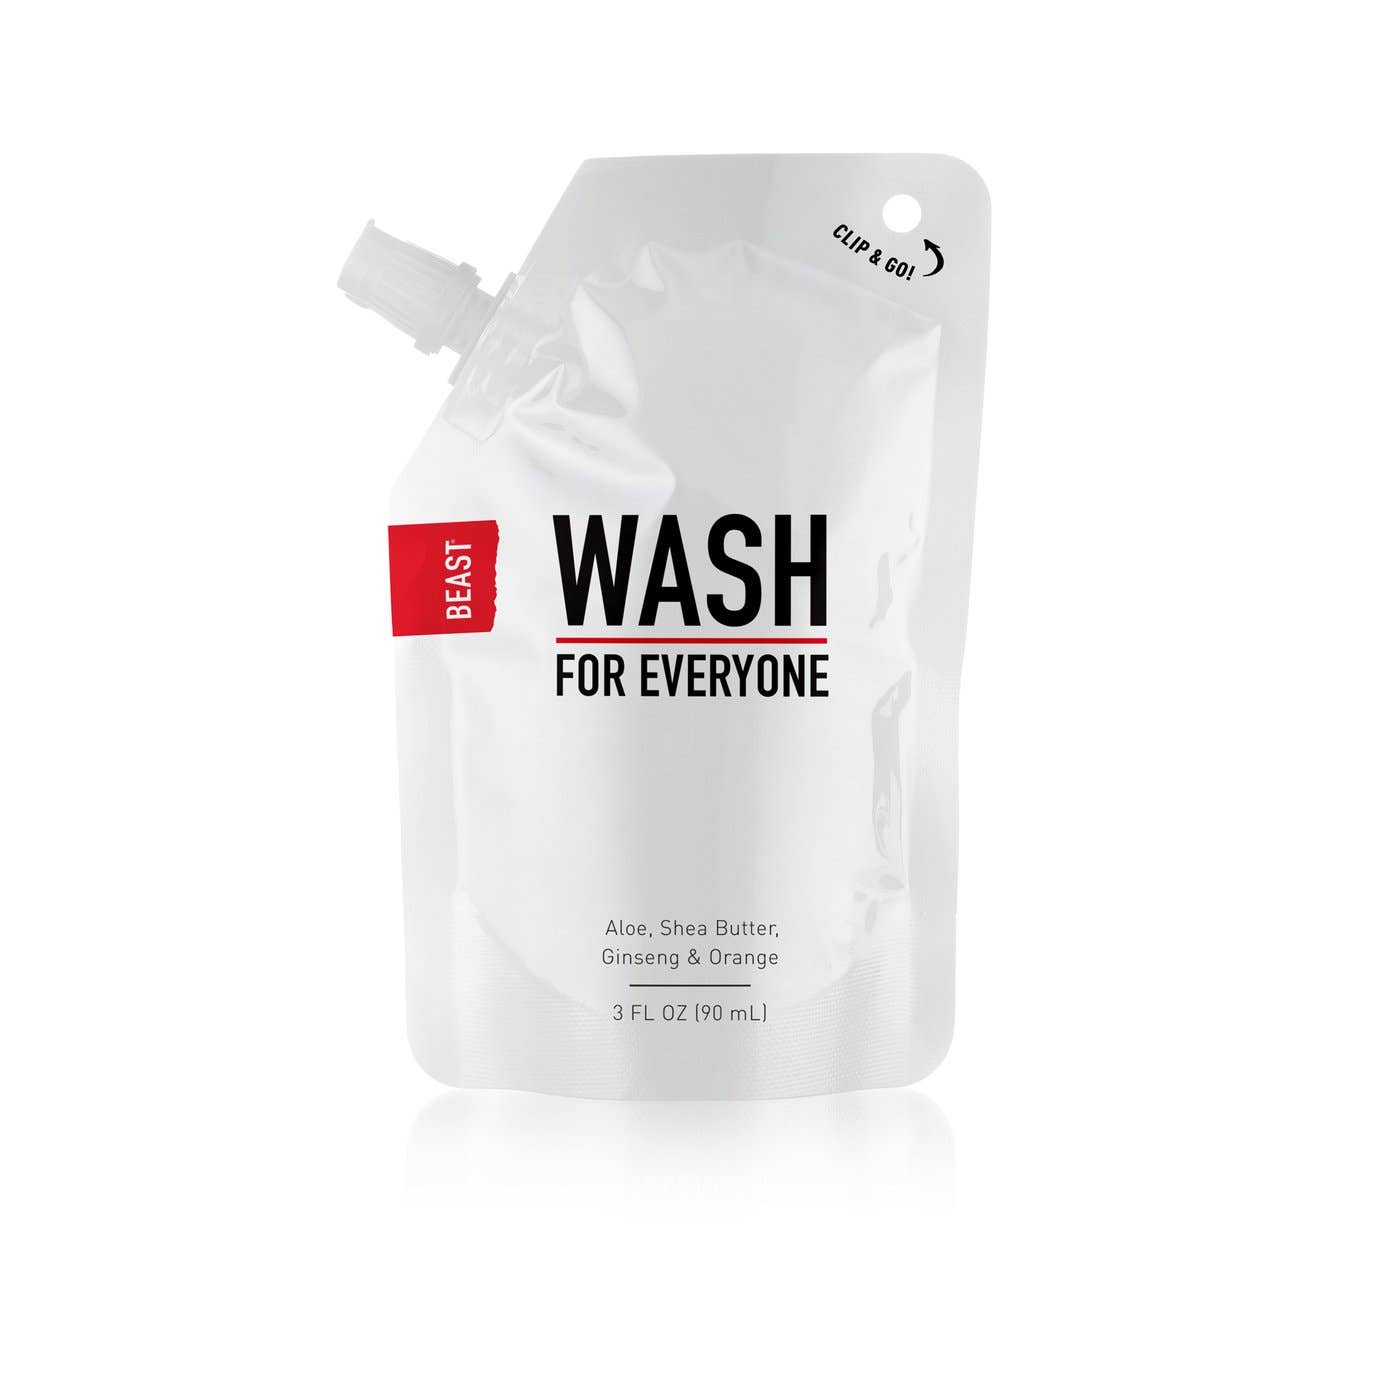 Everyone Wash Refill Pouch